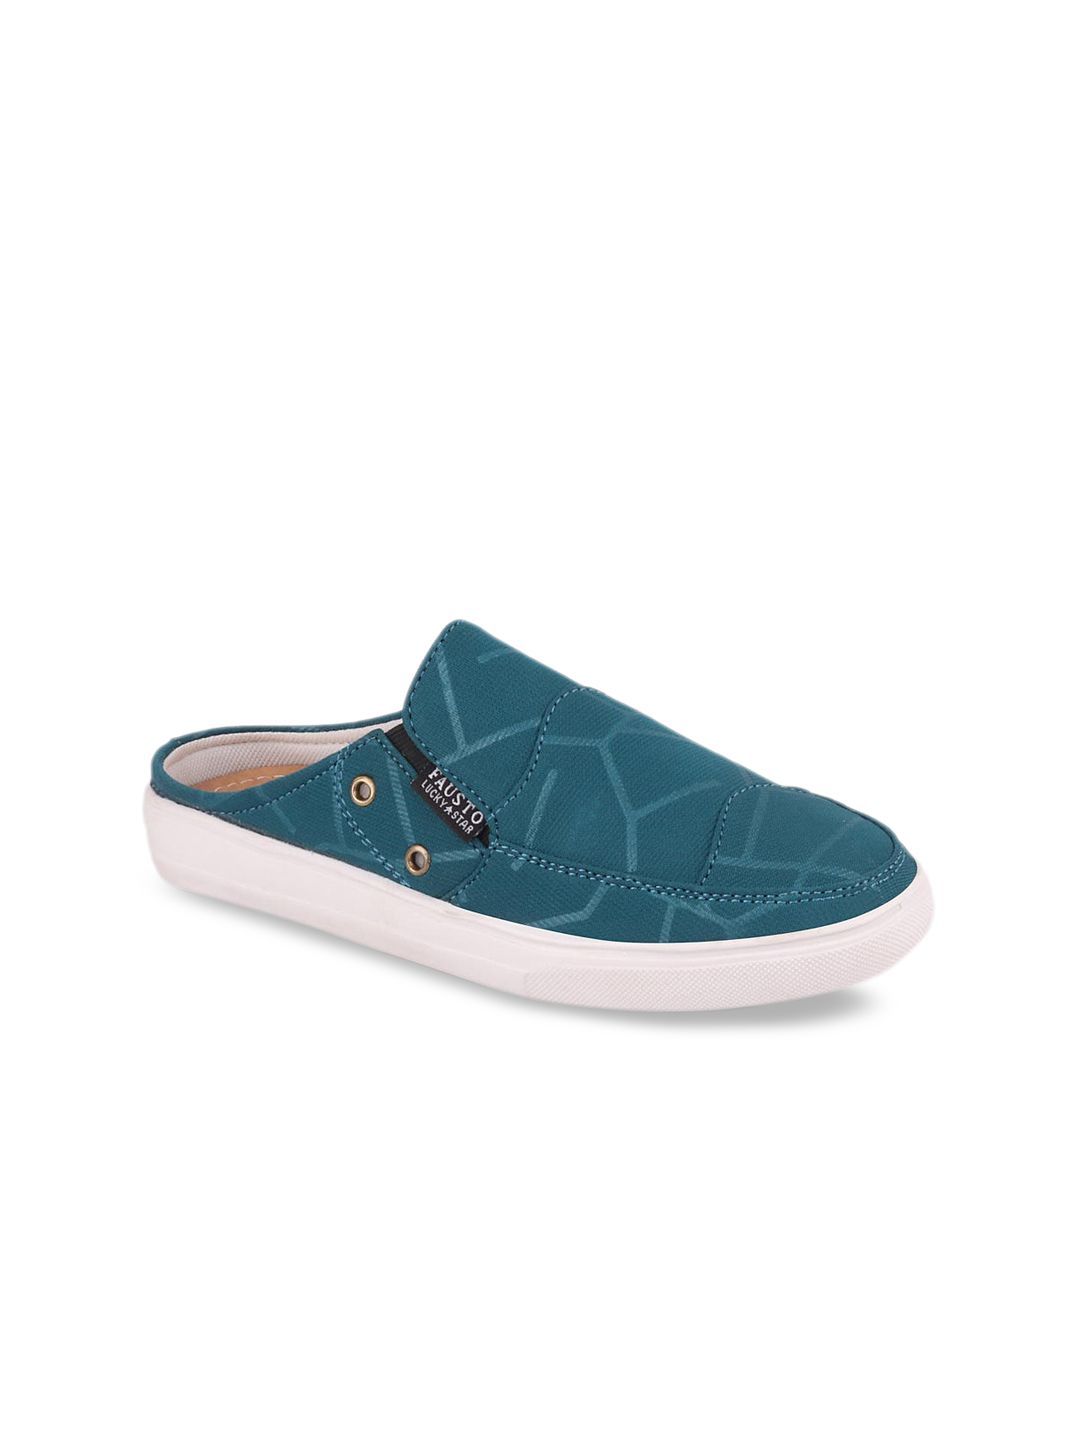 FAUSTO Women Blue Slip-On Sneakers Price in India